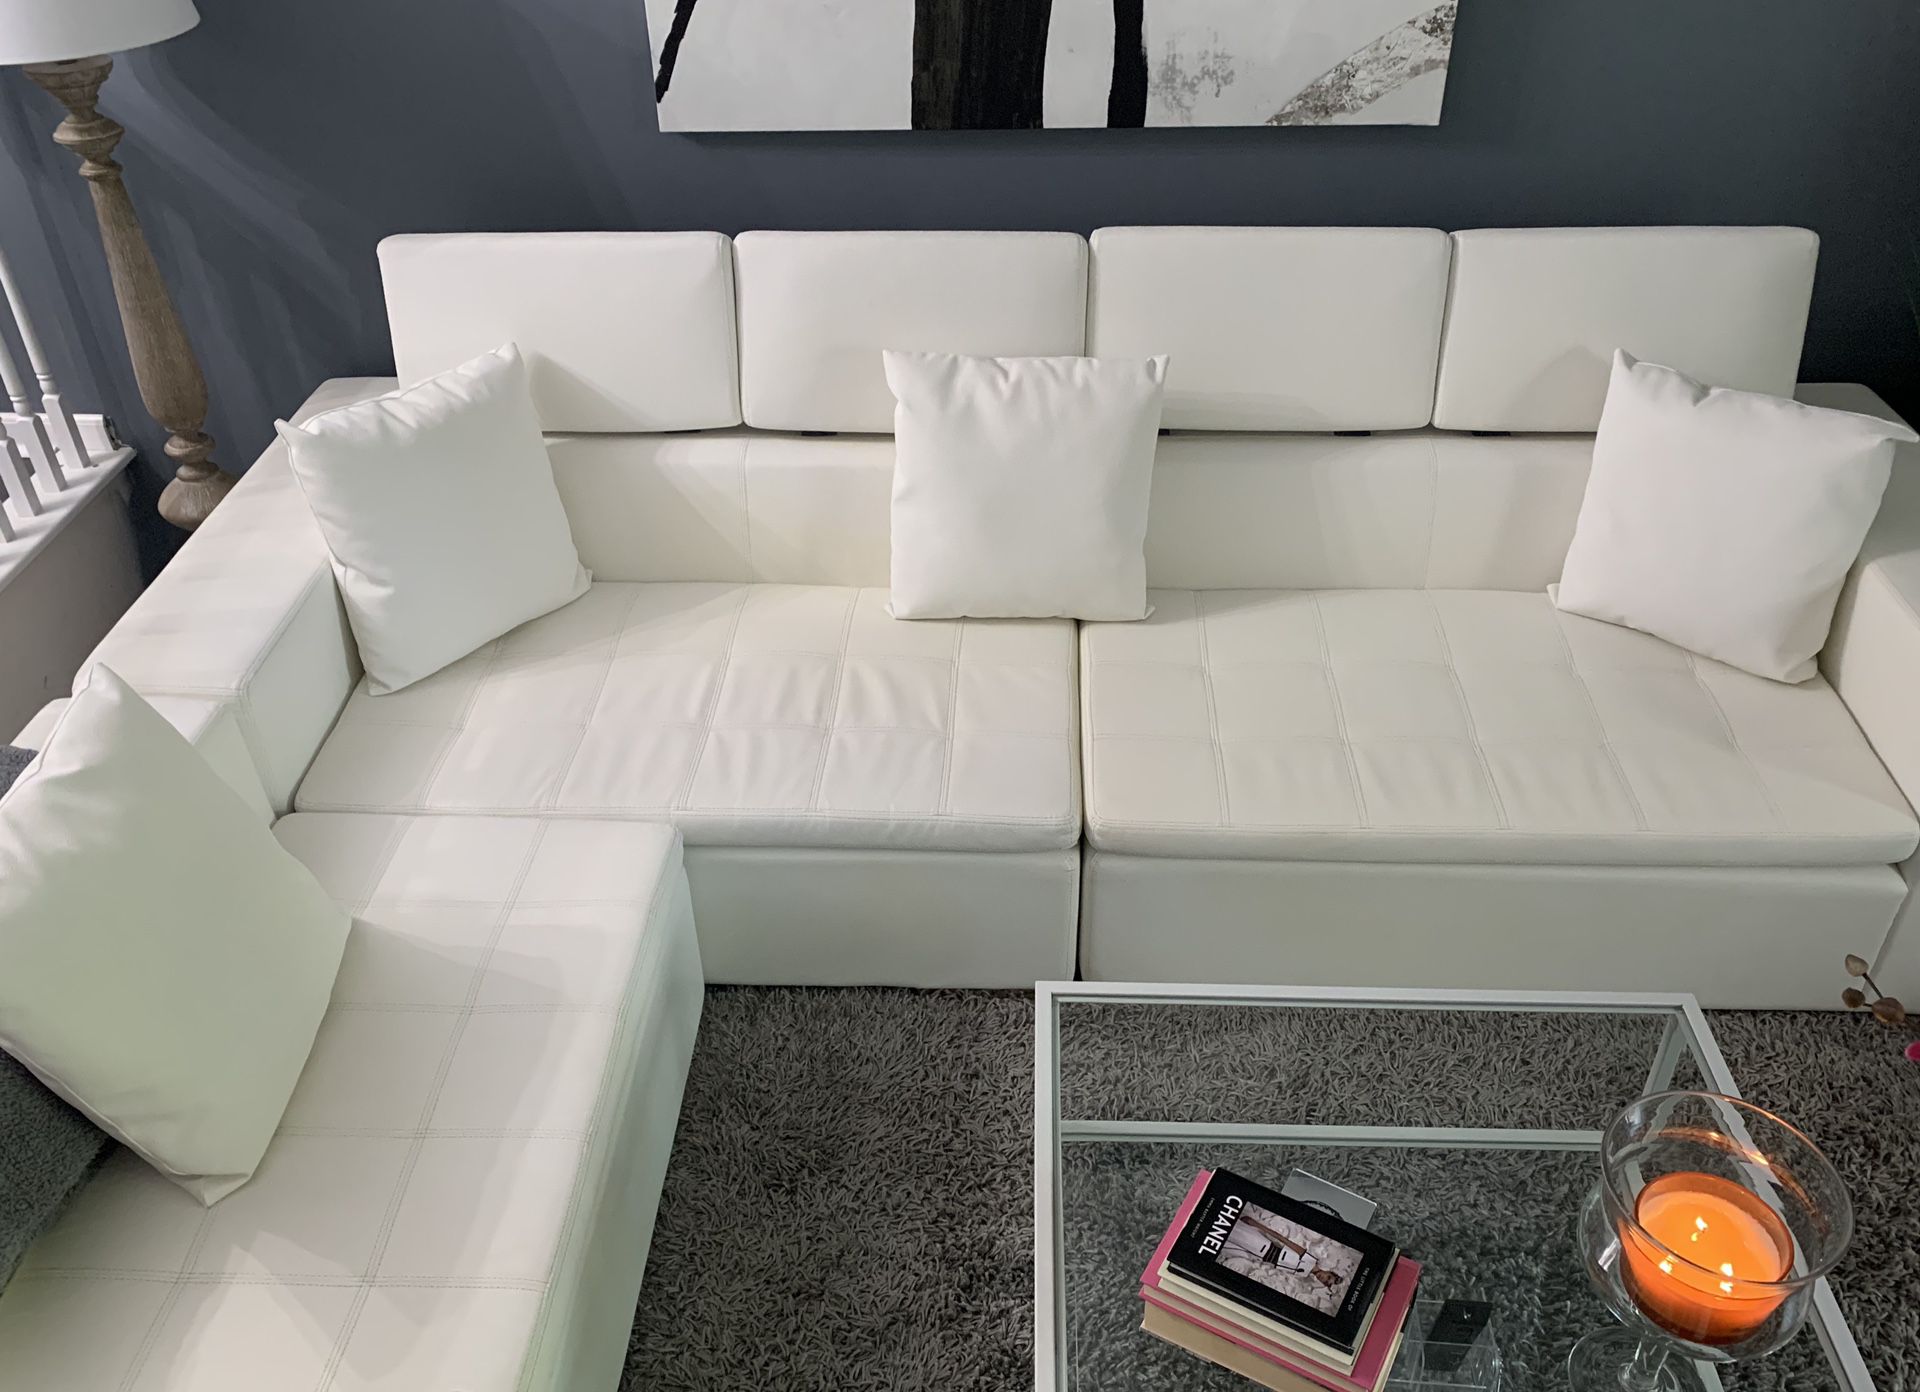 Bueatiful white sectional couch